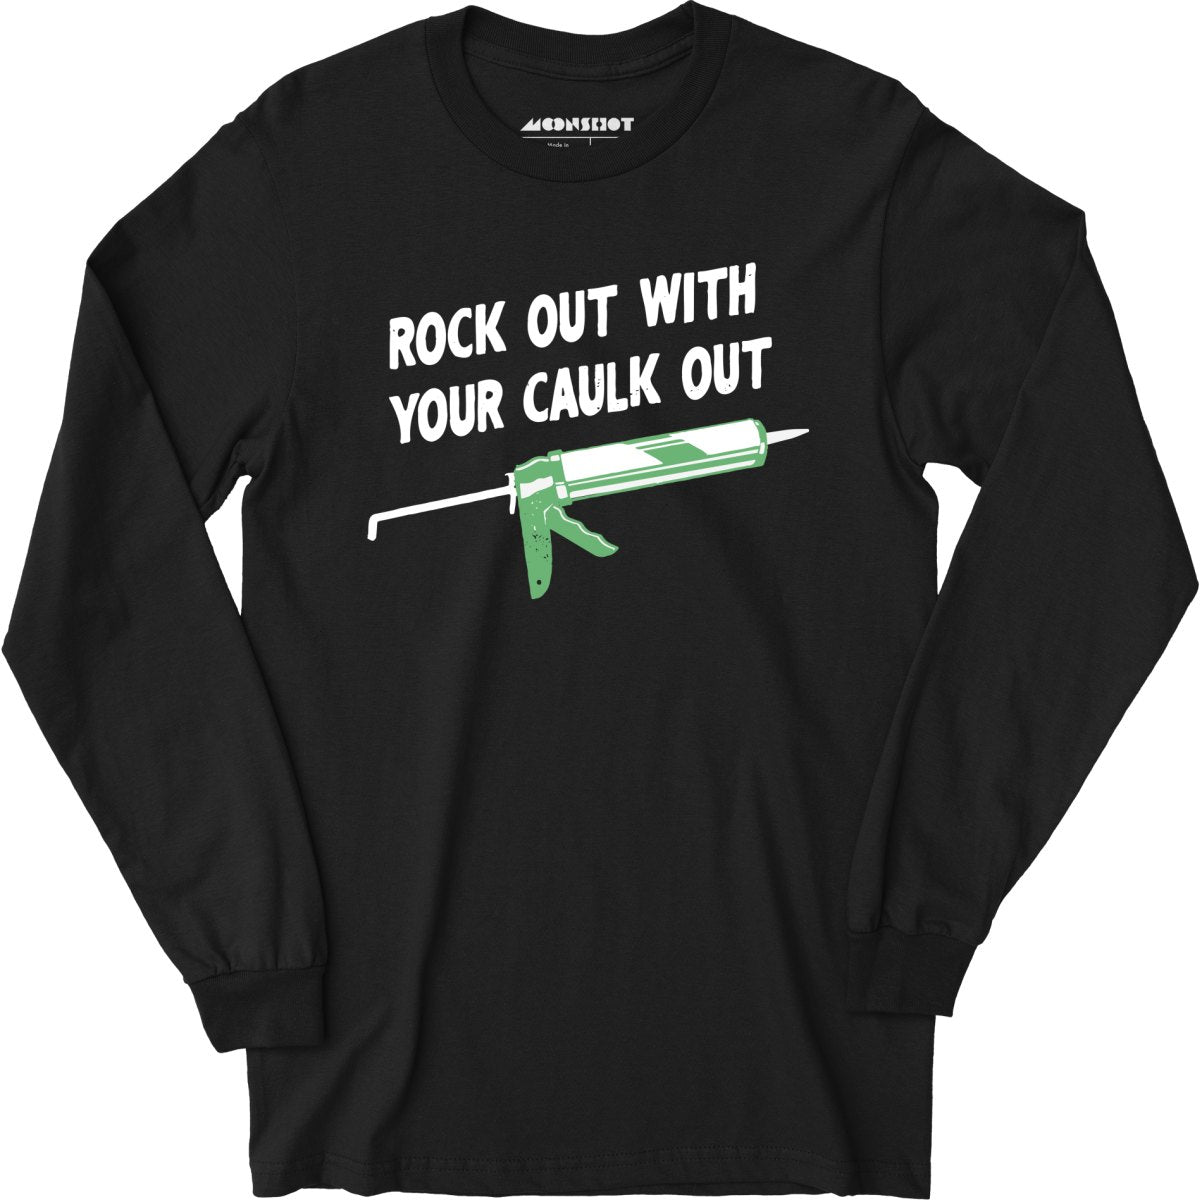 Rock Out With Your Caulk Out - Long Sleeve T-Shirt